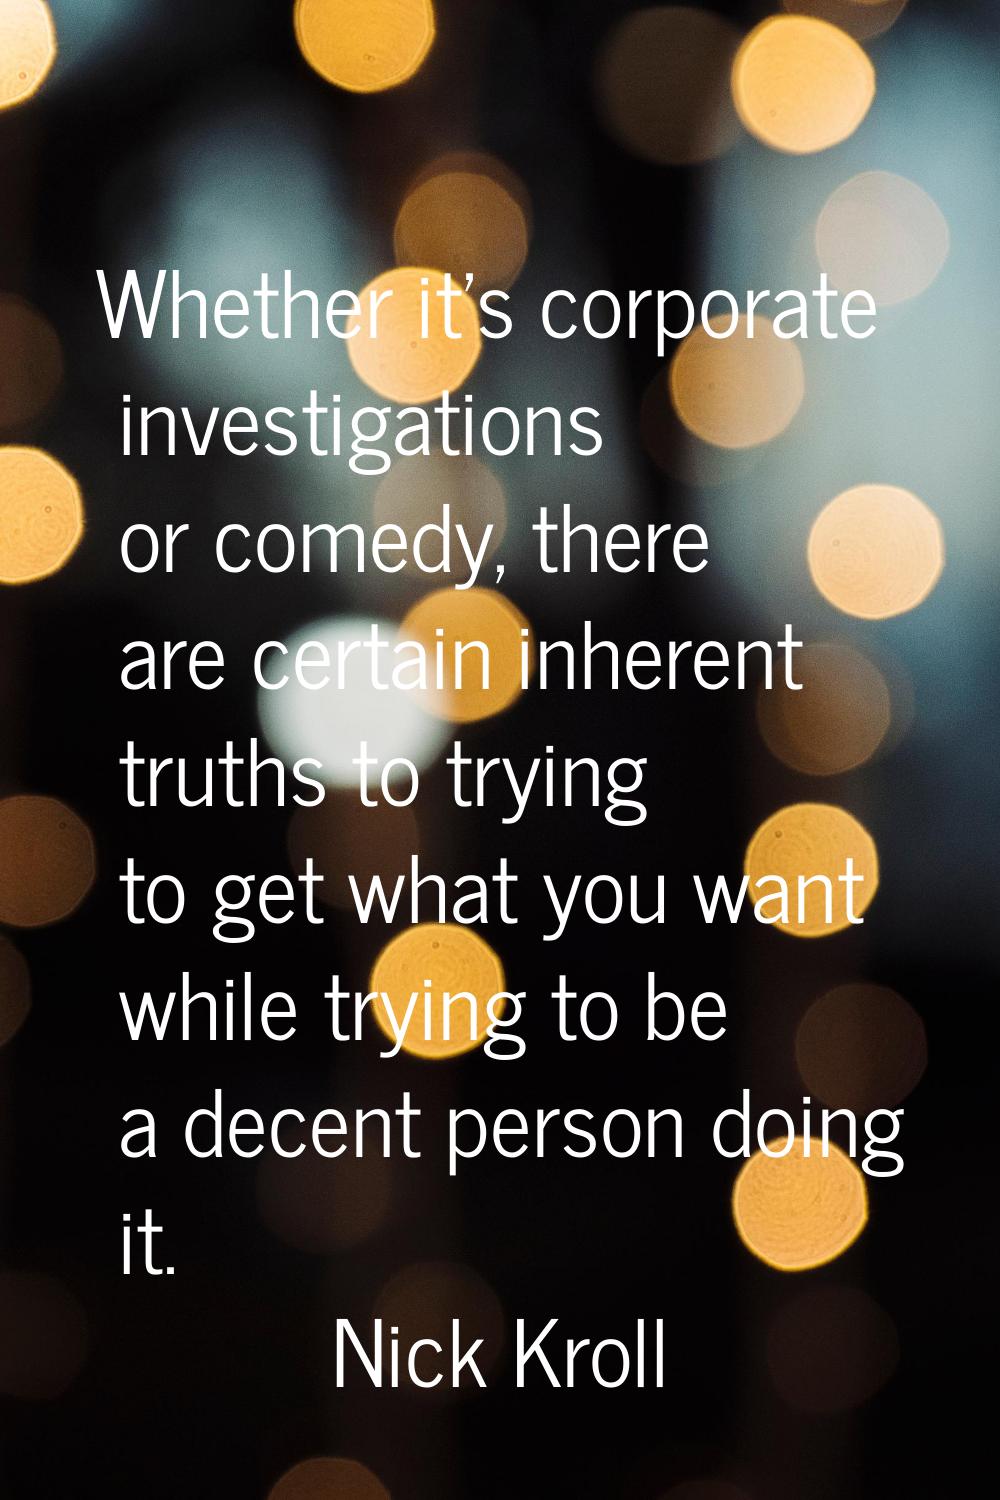 Whether it's corporate investigations or comedy, there are certain inherent truths to trying to get